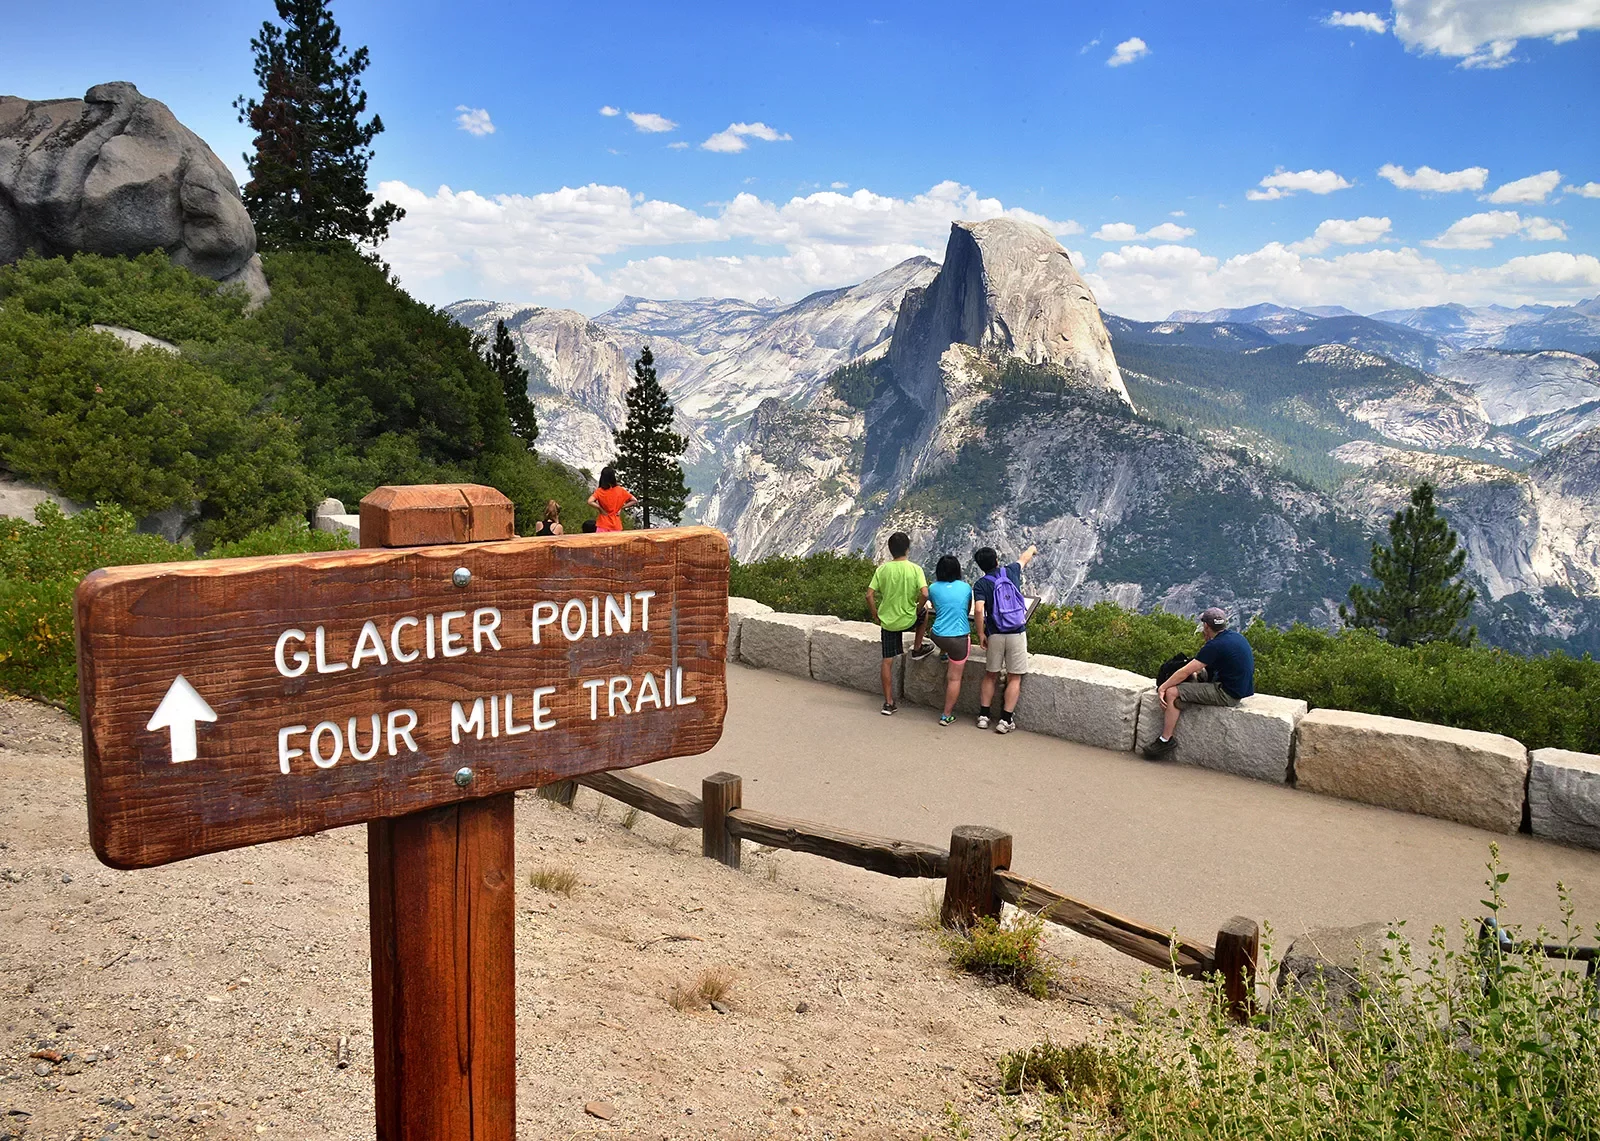 &quot;GLACIER POINT&quot; sign in foreground, guests and mountain in background.